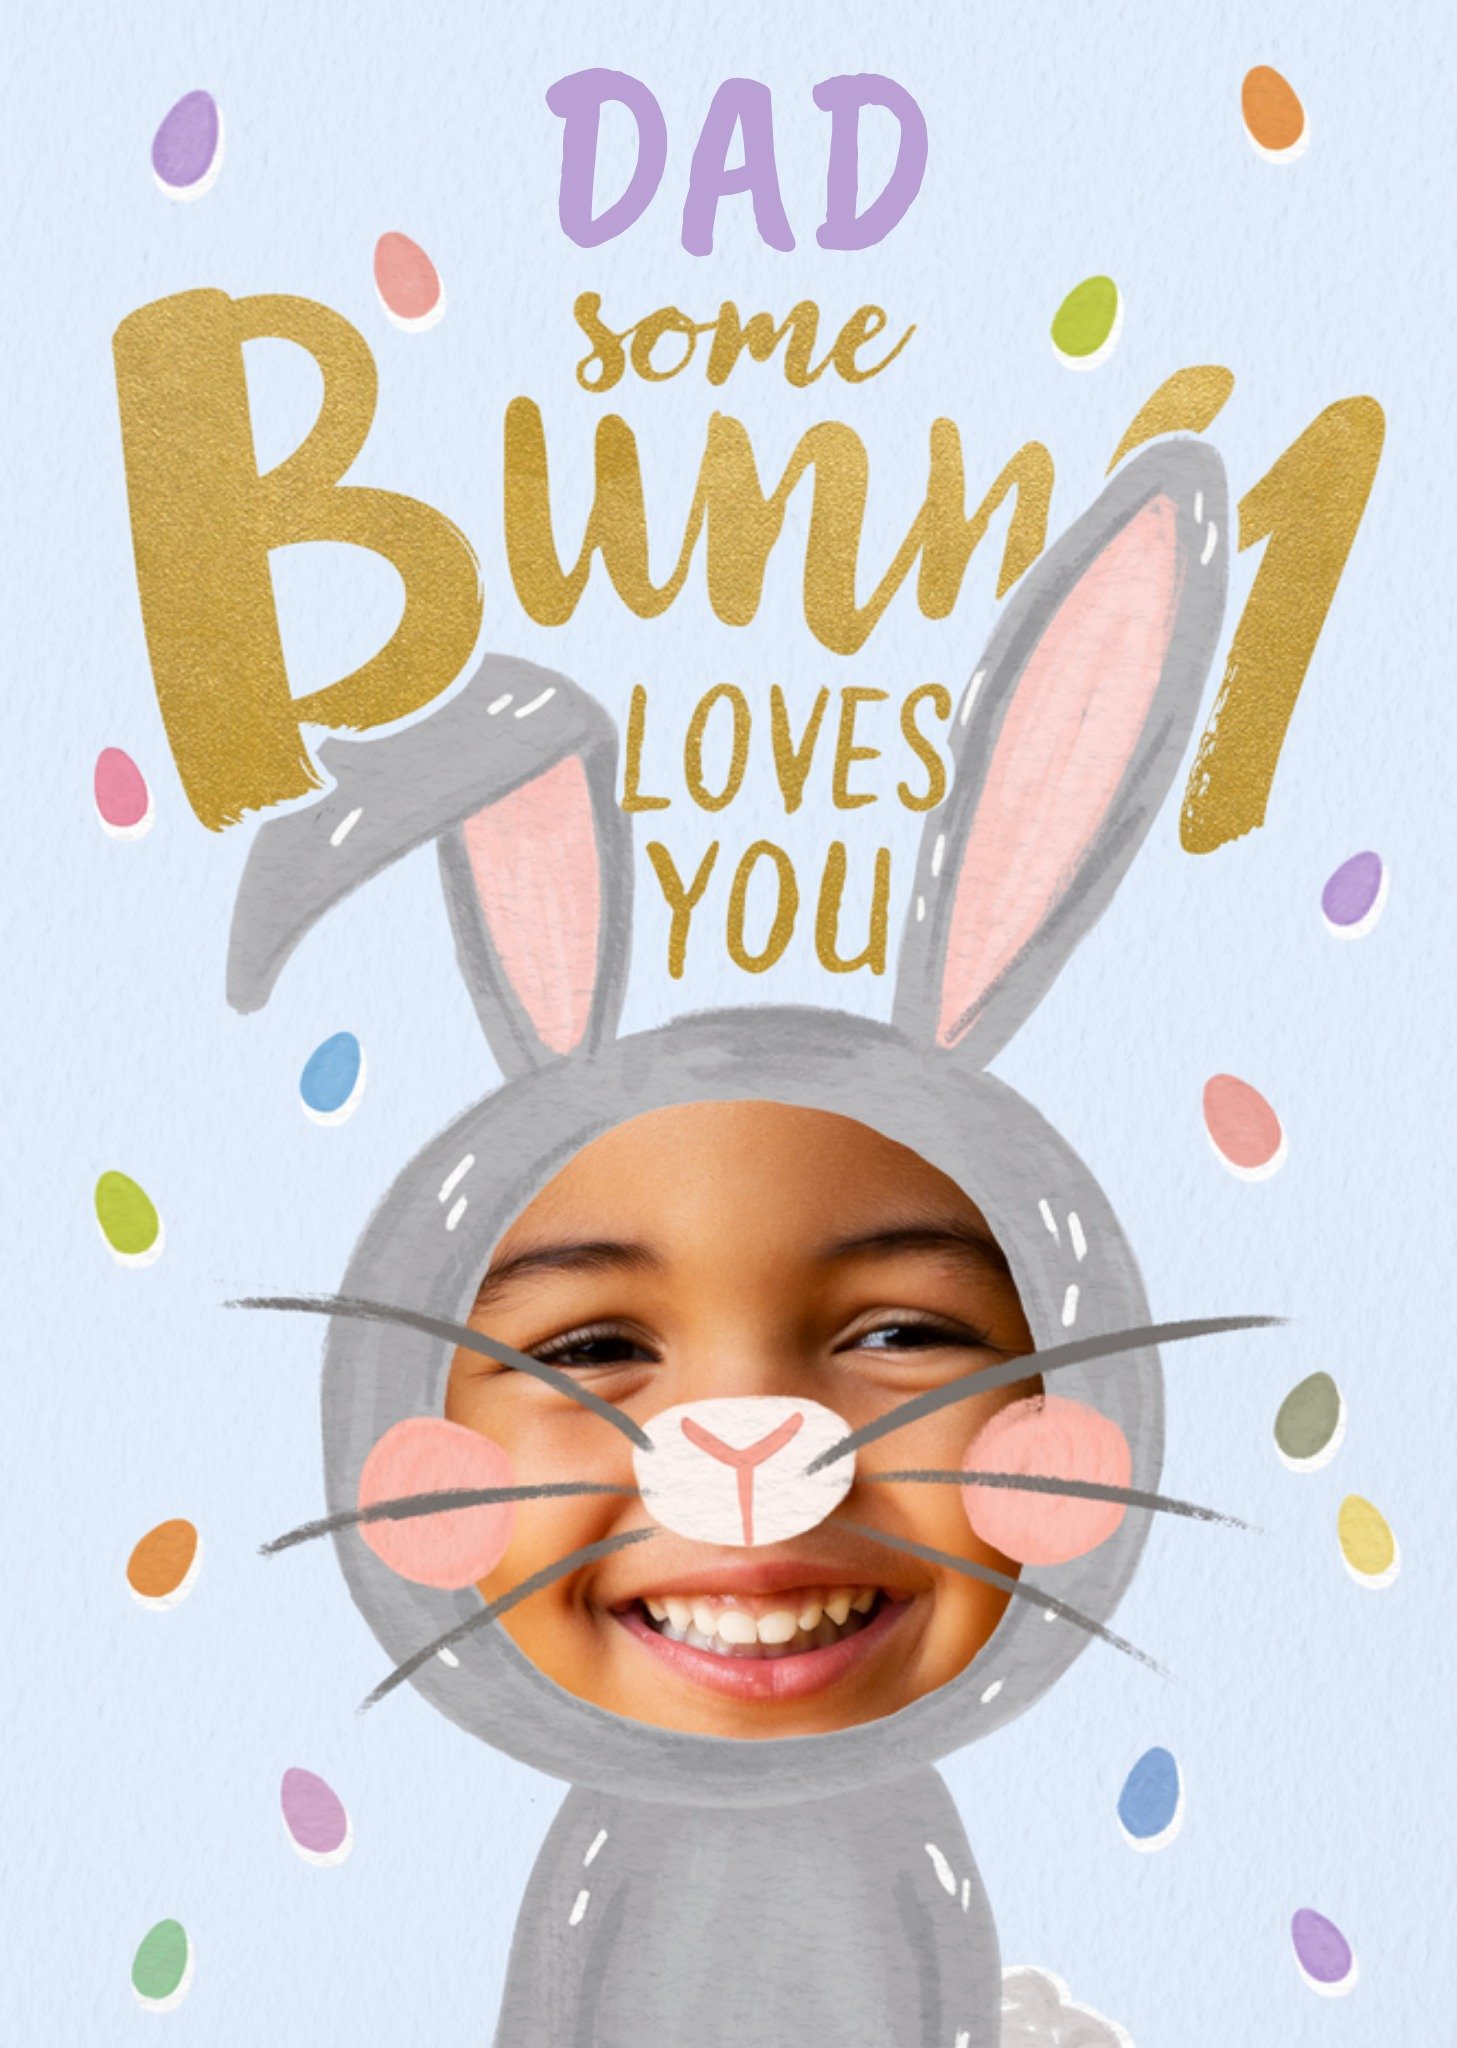 Moonpig Dad Some Bunny Loves You Photo Upload Easter Card Ecard